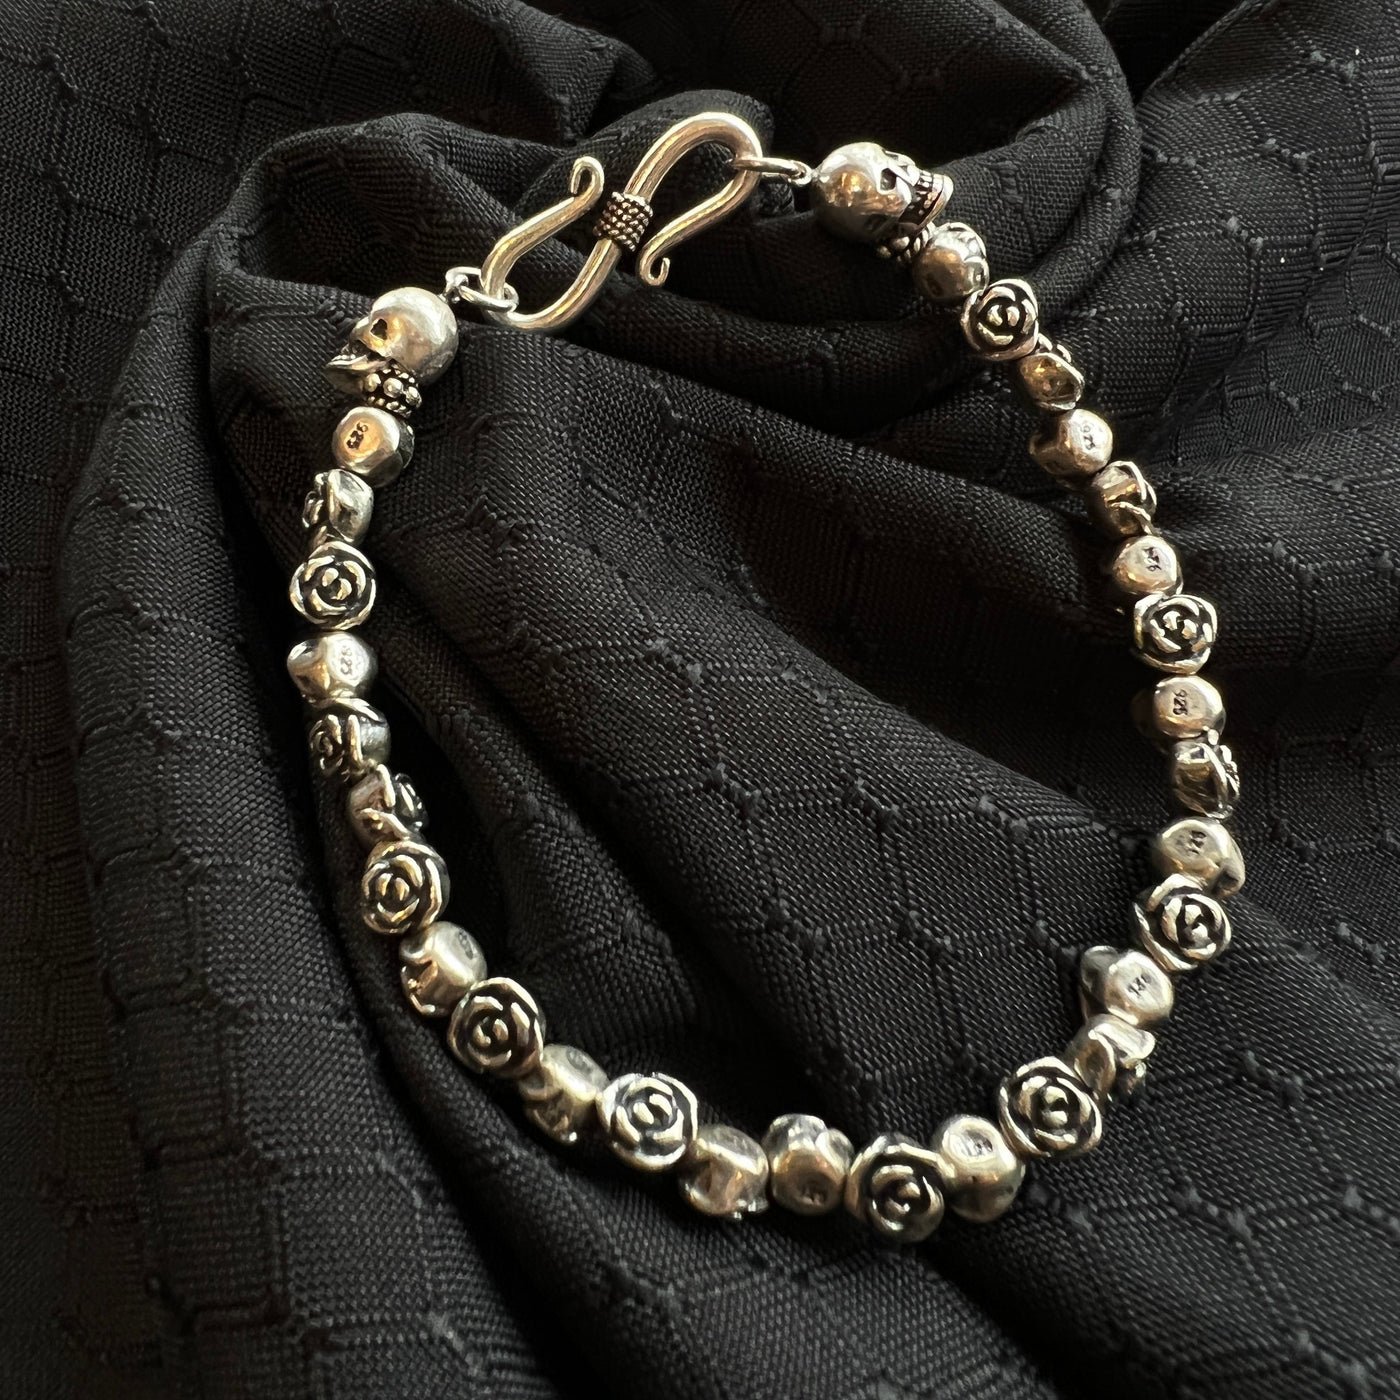 Gotstyle Fashion - Dustin Granofsky Jewellery Sterling Silver Bracelet with Roses